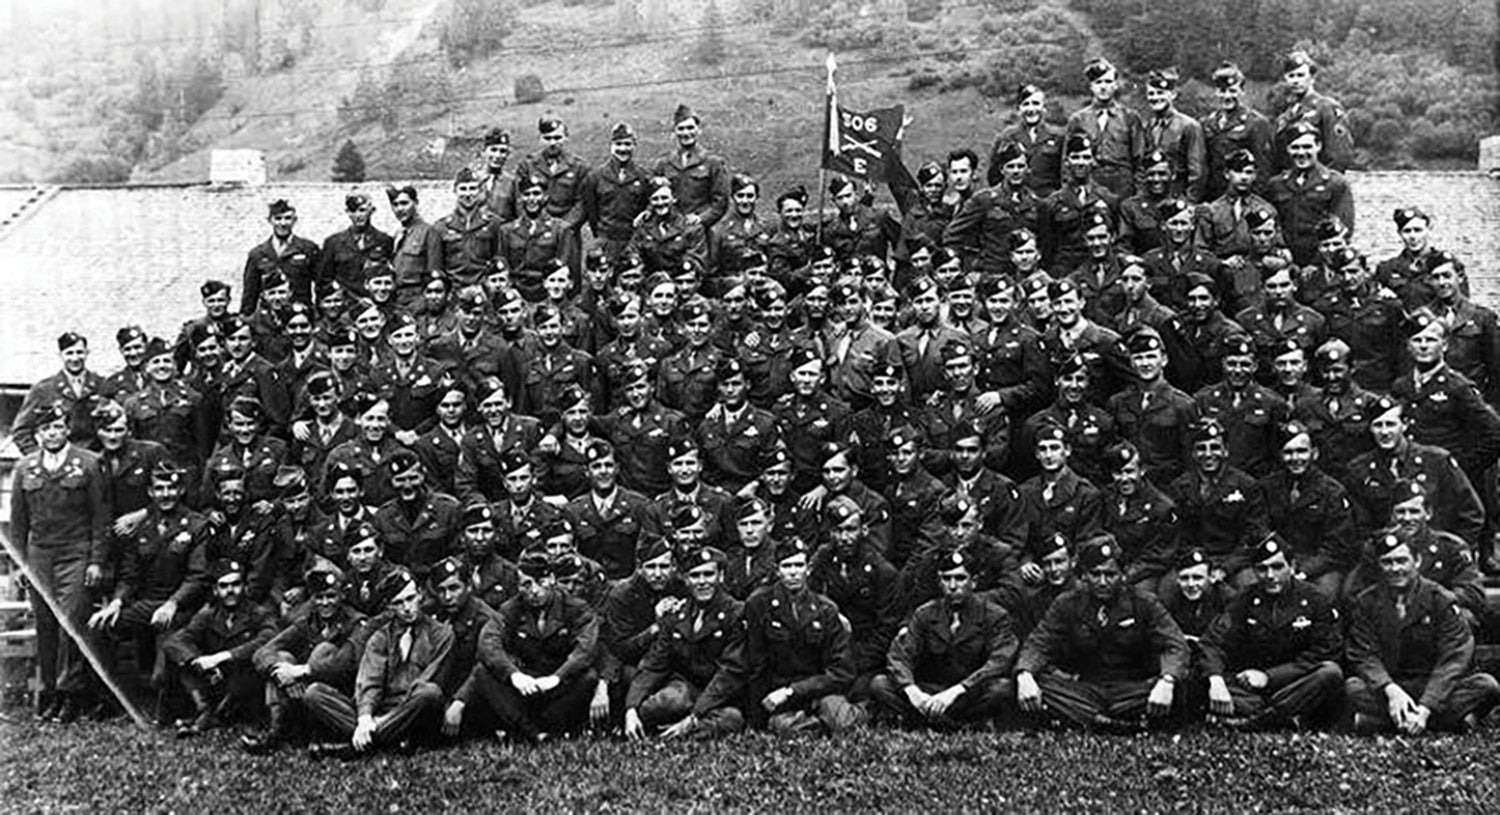 Paratroopers of Company E, 506th Parachute Infantry Regiment, in Austria following Germany’s surrender in 1945. (Credit: Wikipedia)